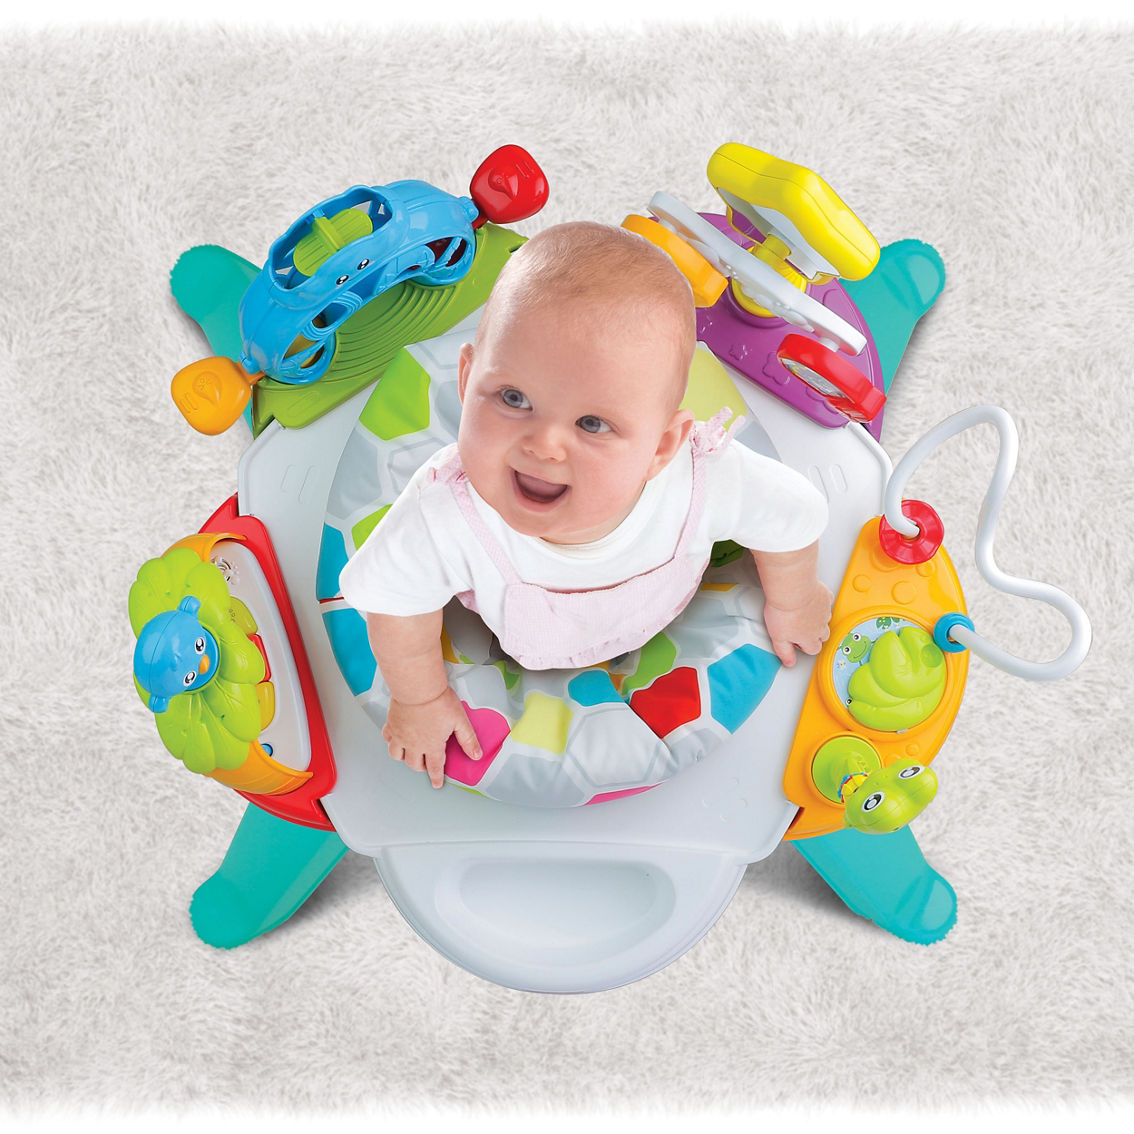 Winfun Baby Move Activity Center - Image 5 of 5